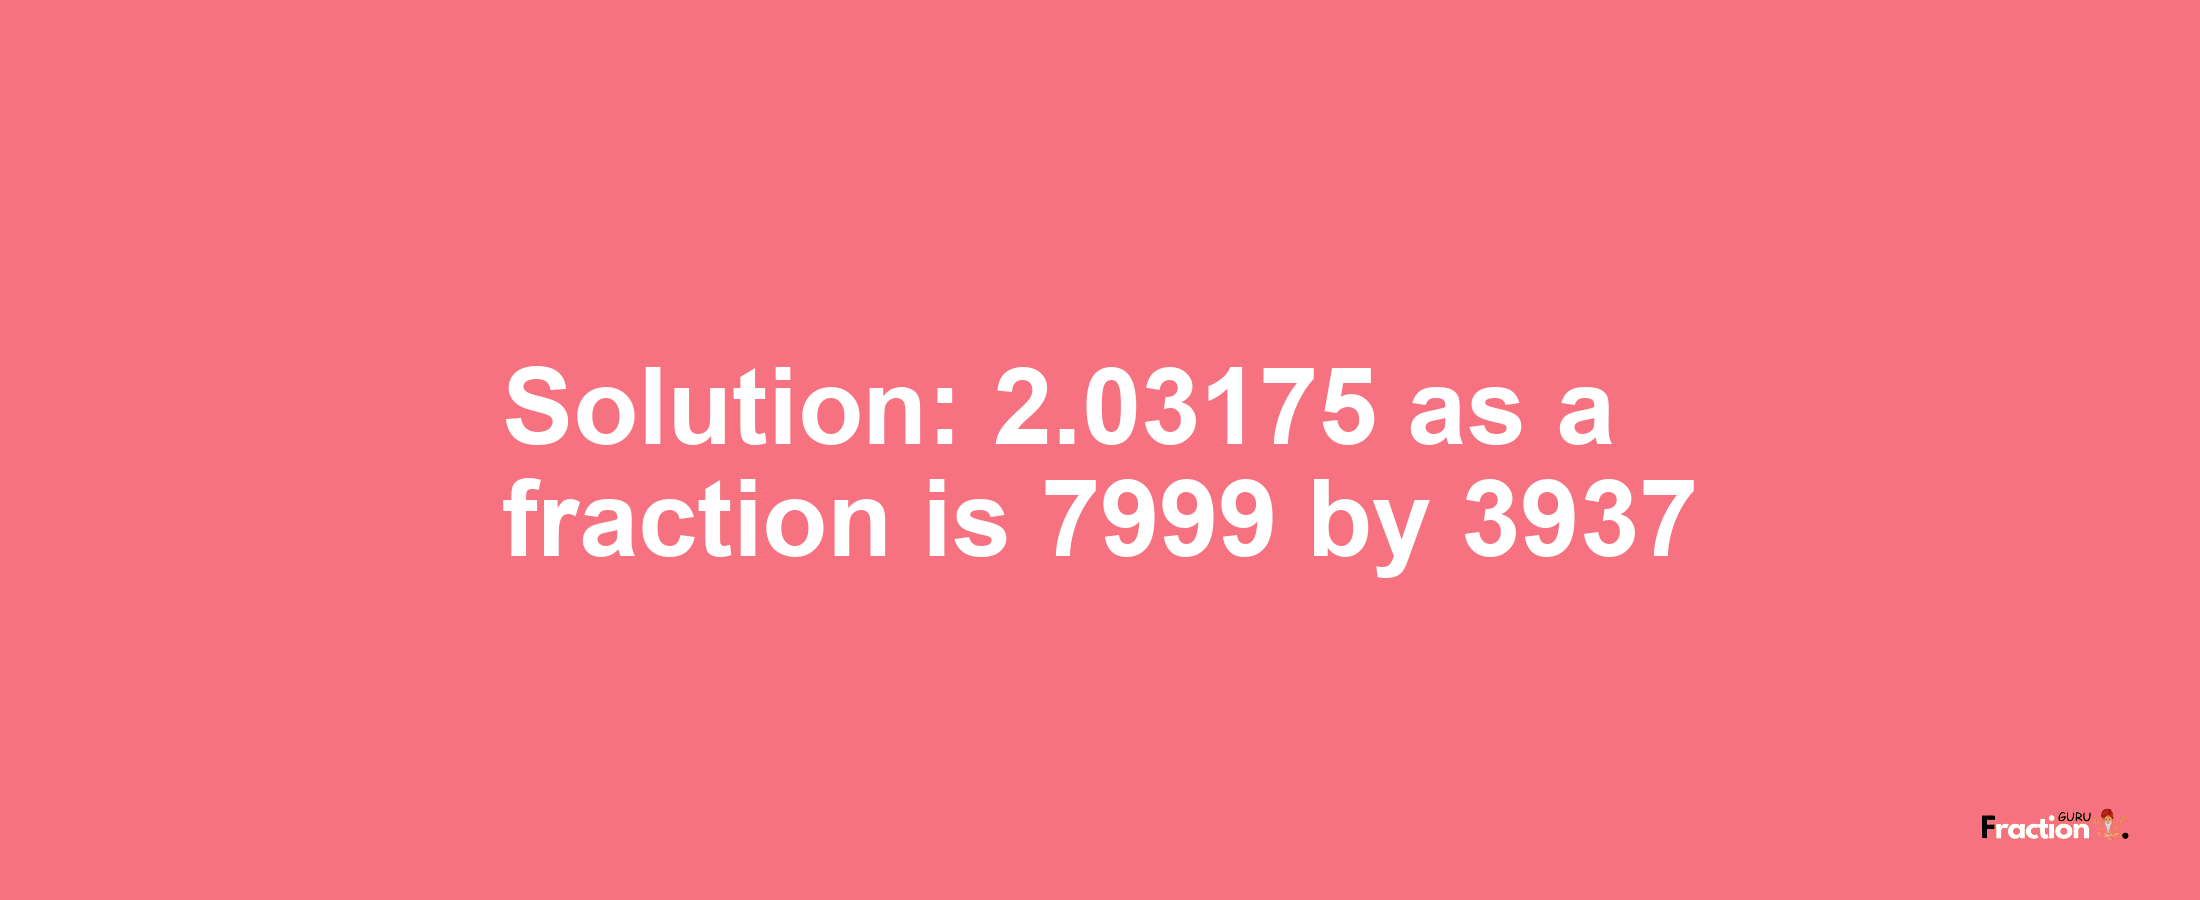 Solution:2.03175 as a fraction is 7999/3937